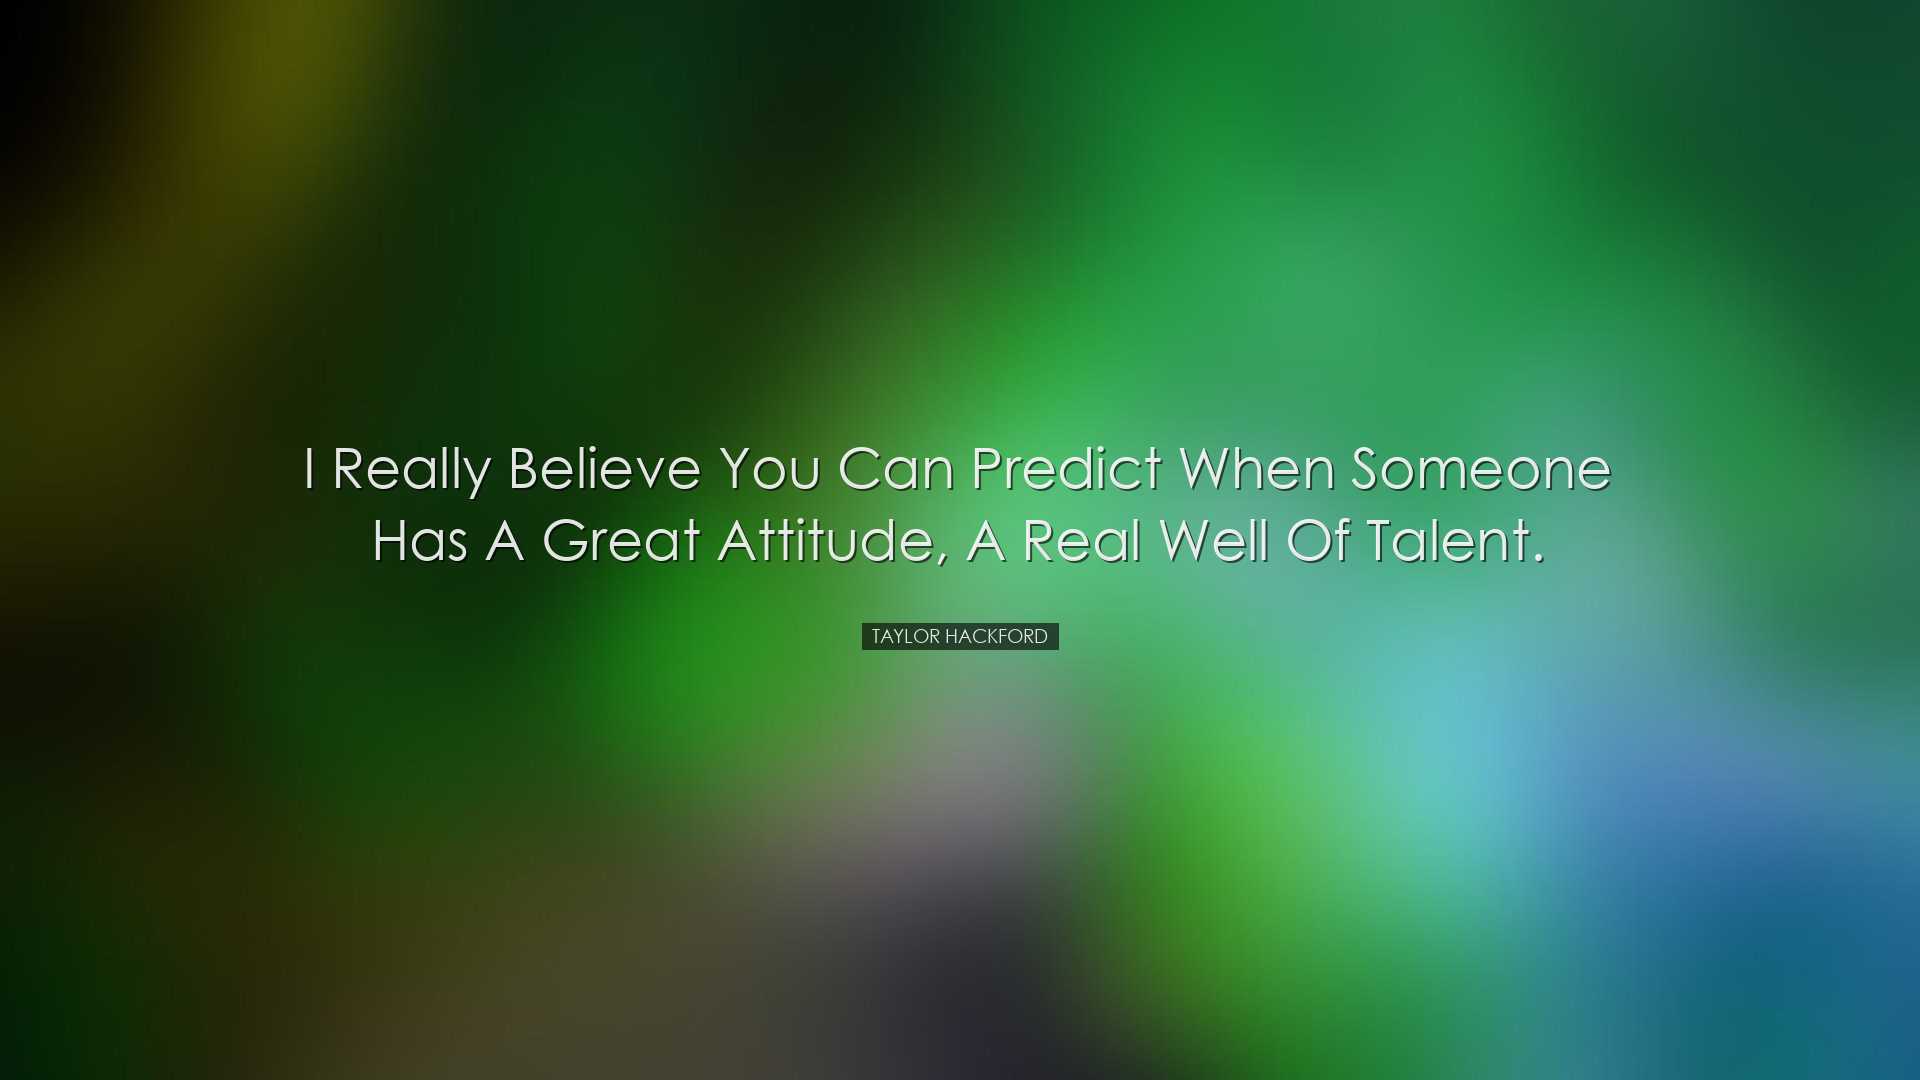 I really believe you can predict when someone has a great attitude